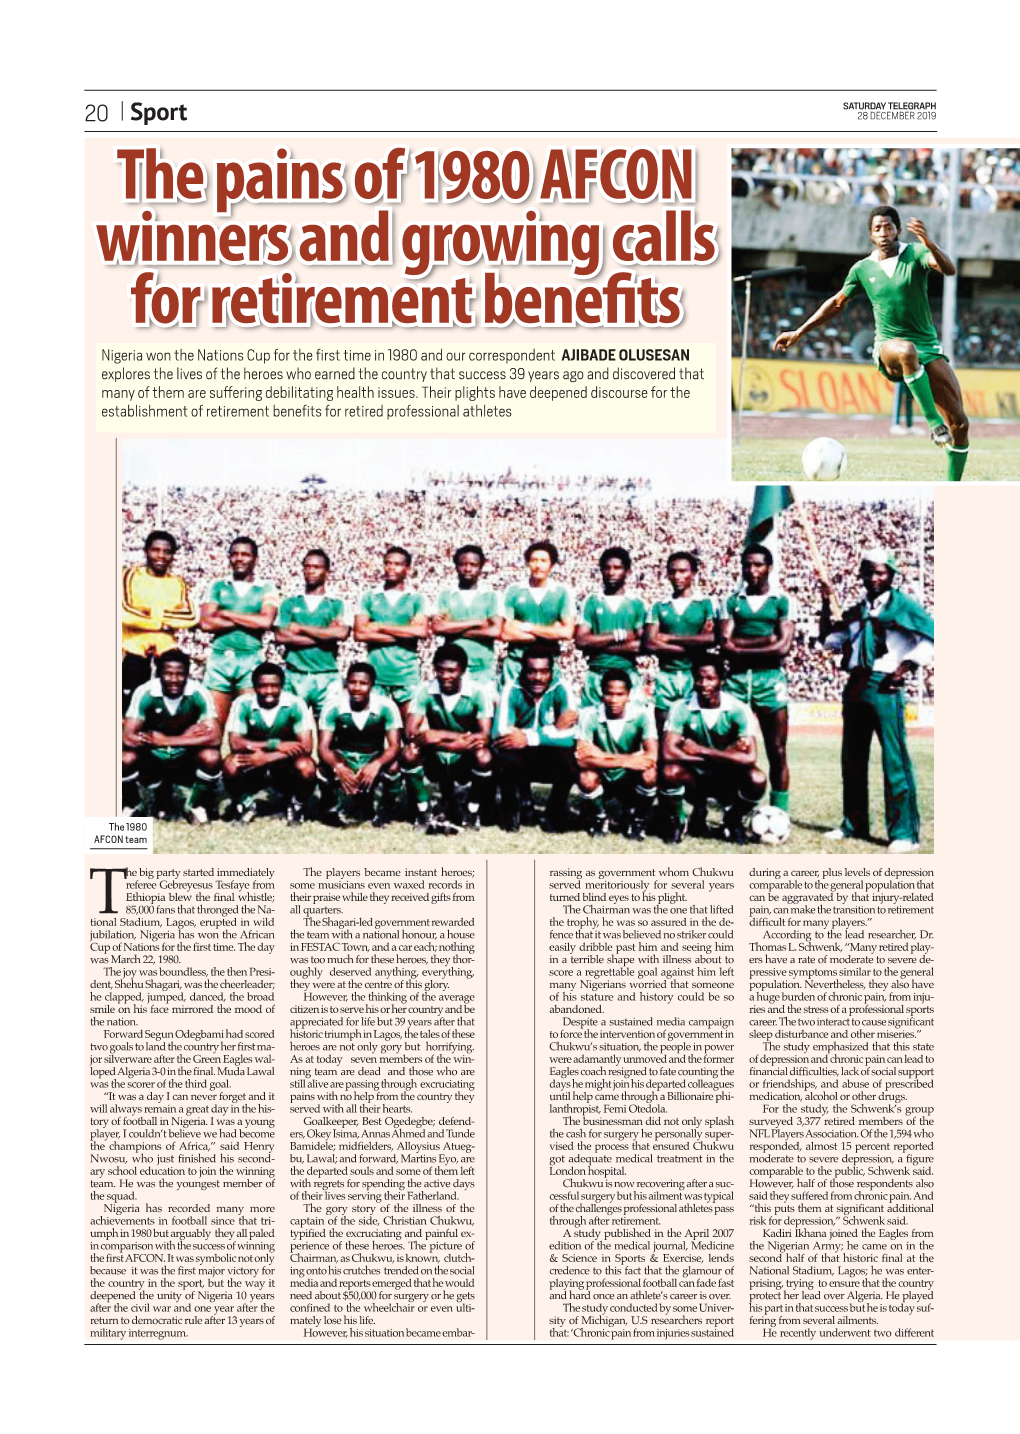 The Pains of 1980 AFCON Winners and Growing Calls for Retirement